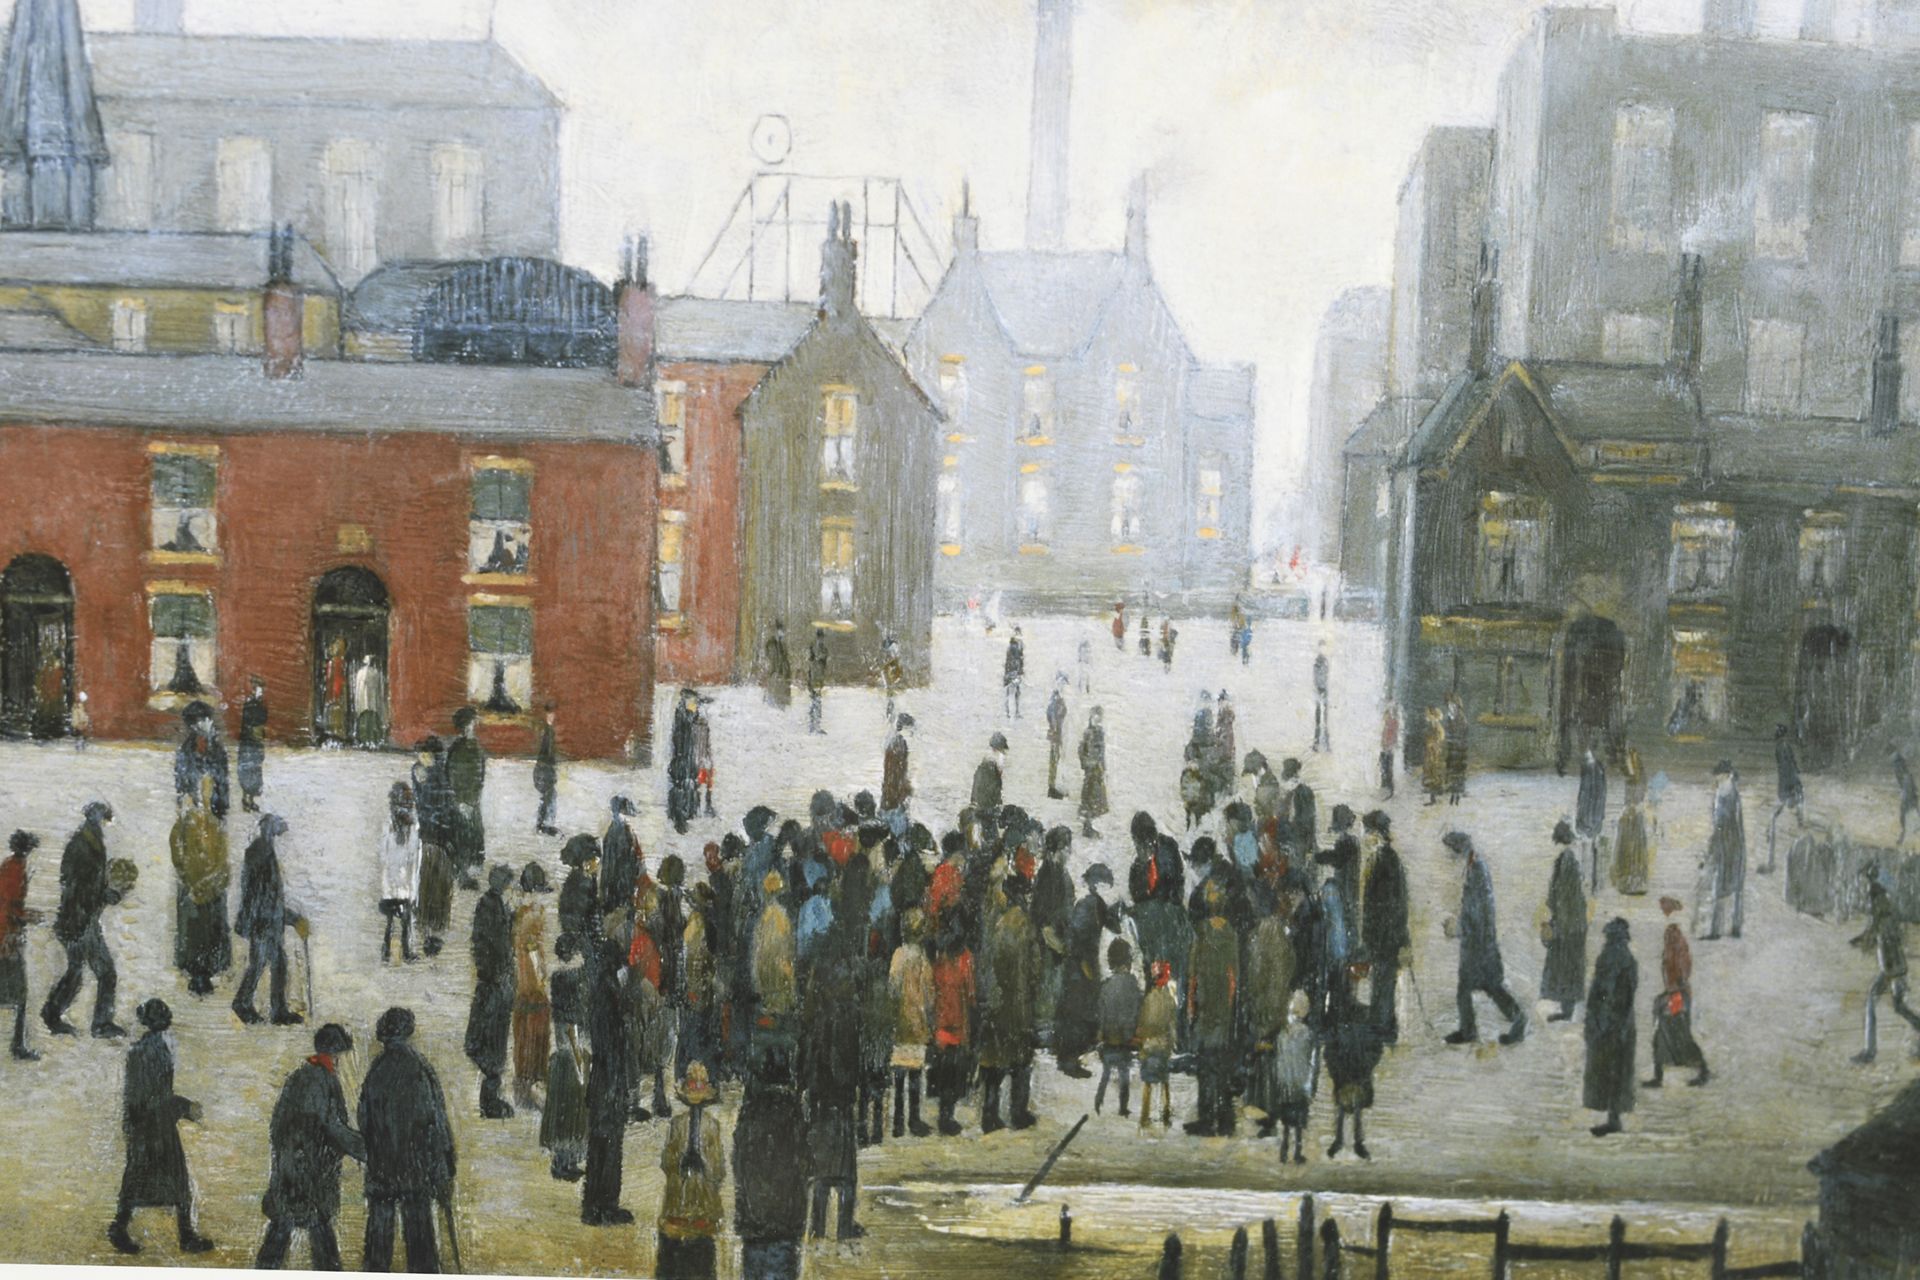 L.S. Lowry Limited Edition "An Accident" - Image 5 of 10